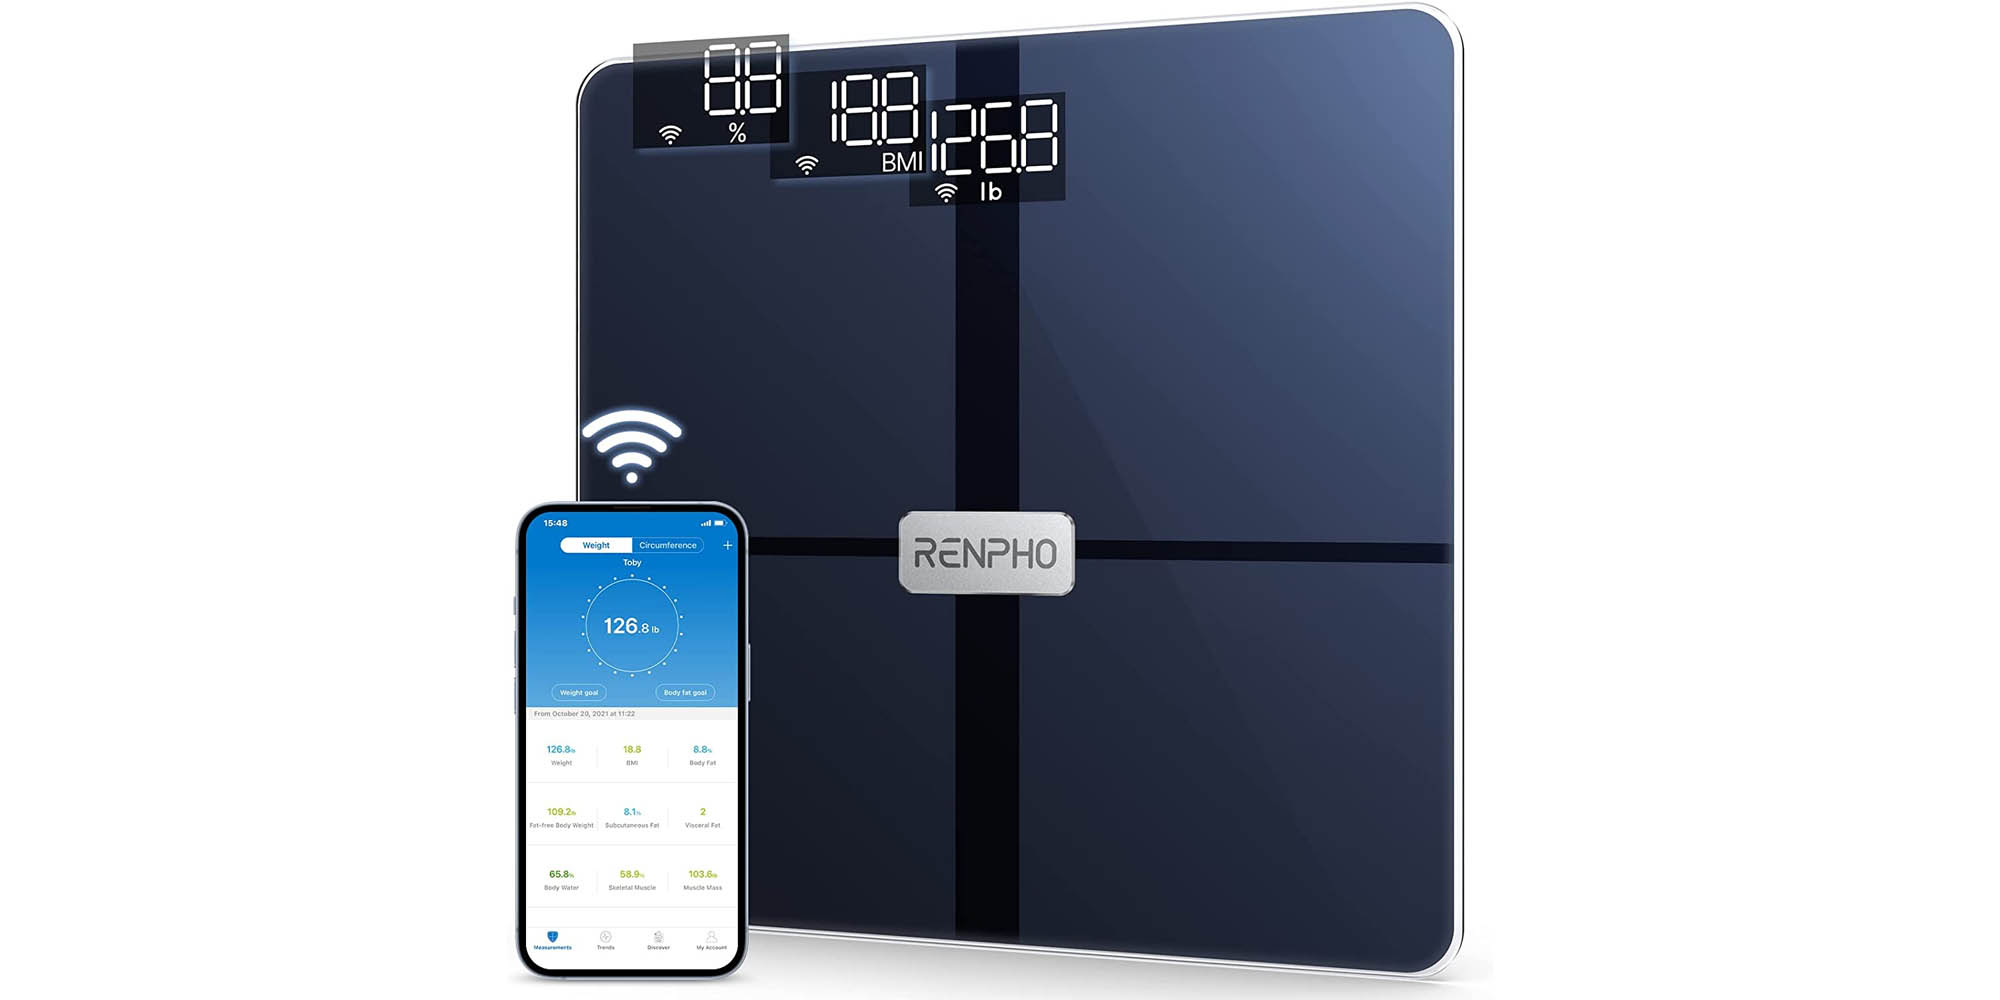 https://9to5toys.com/wp-content/uploads/sites/5/2023/04/Renpho-Smart-Wi-Fi-Body-Weight-Scale.jpg